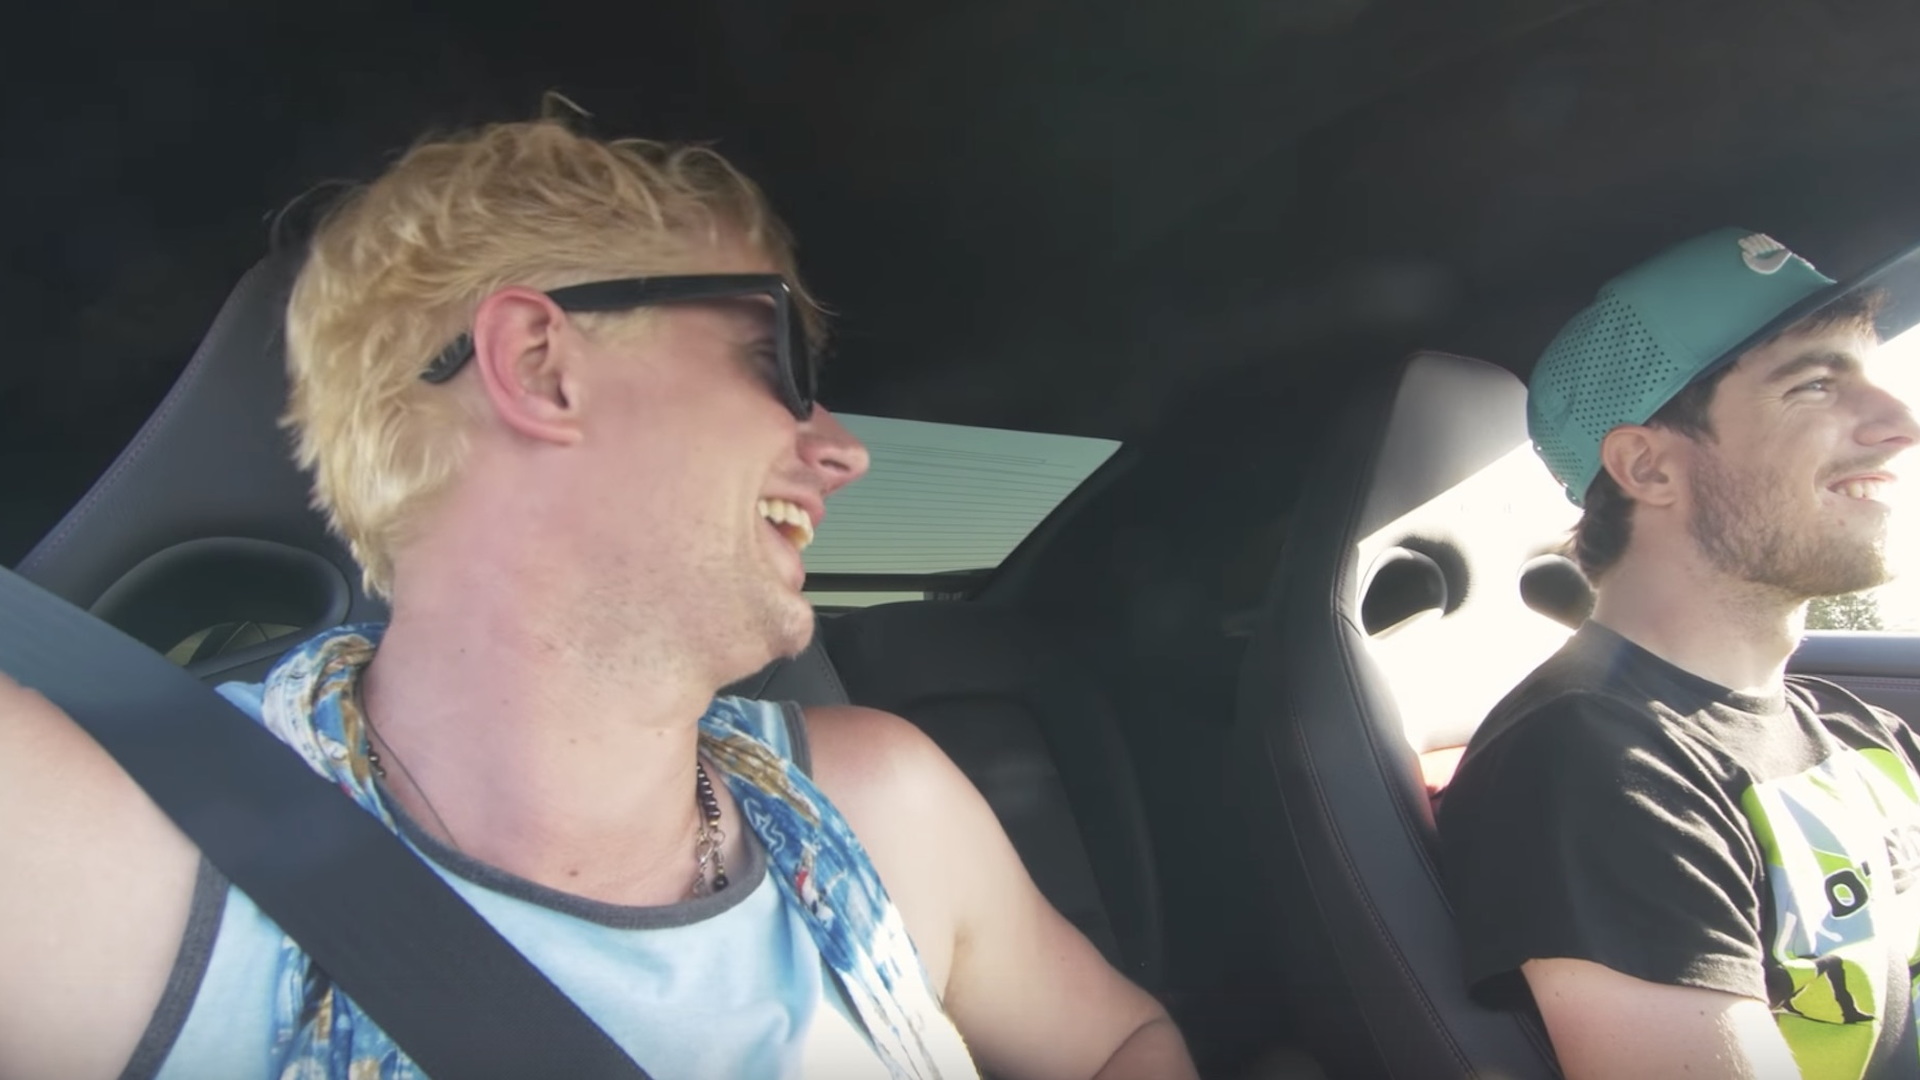 Chad Lindberg rides in Nissan GT-R for first time